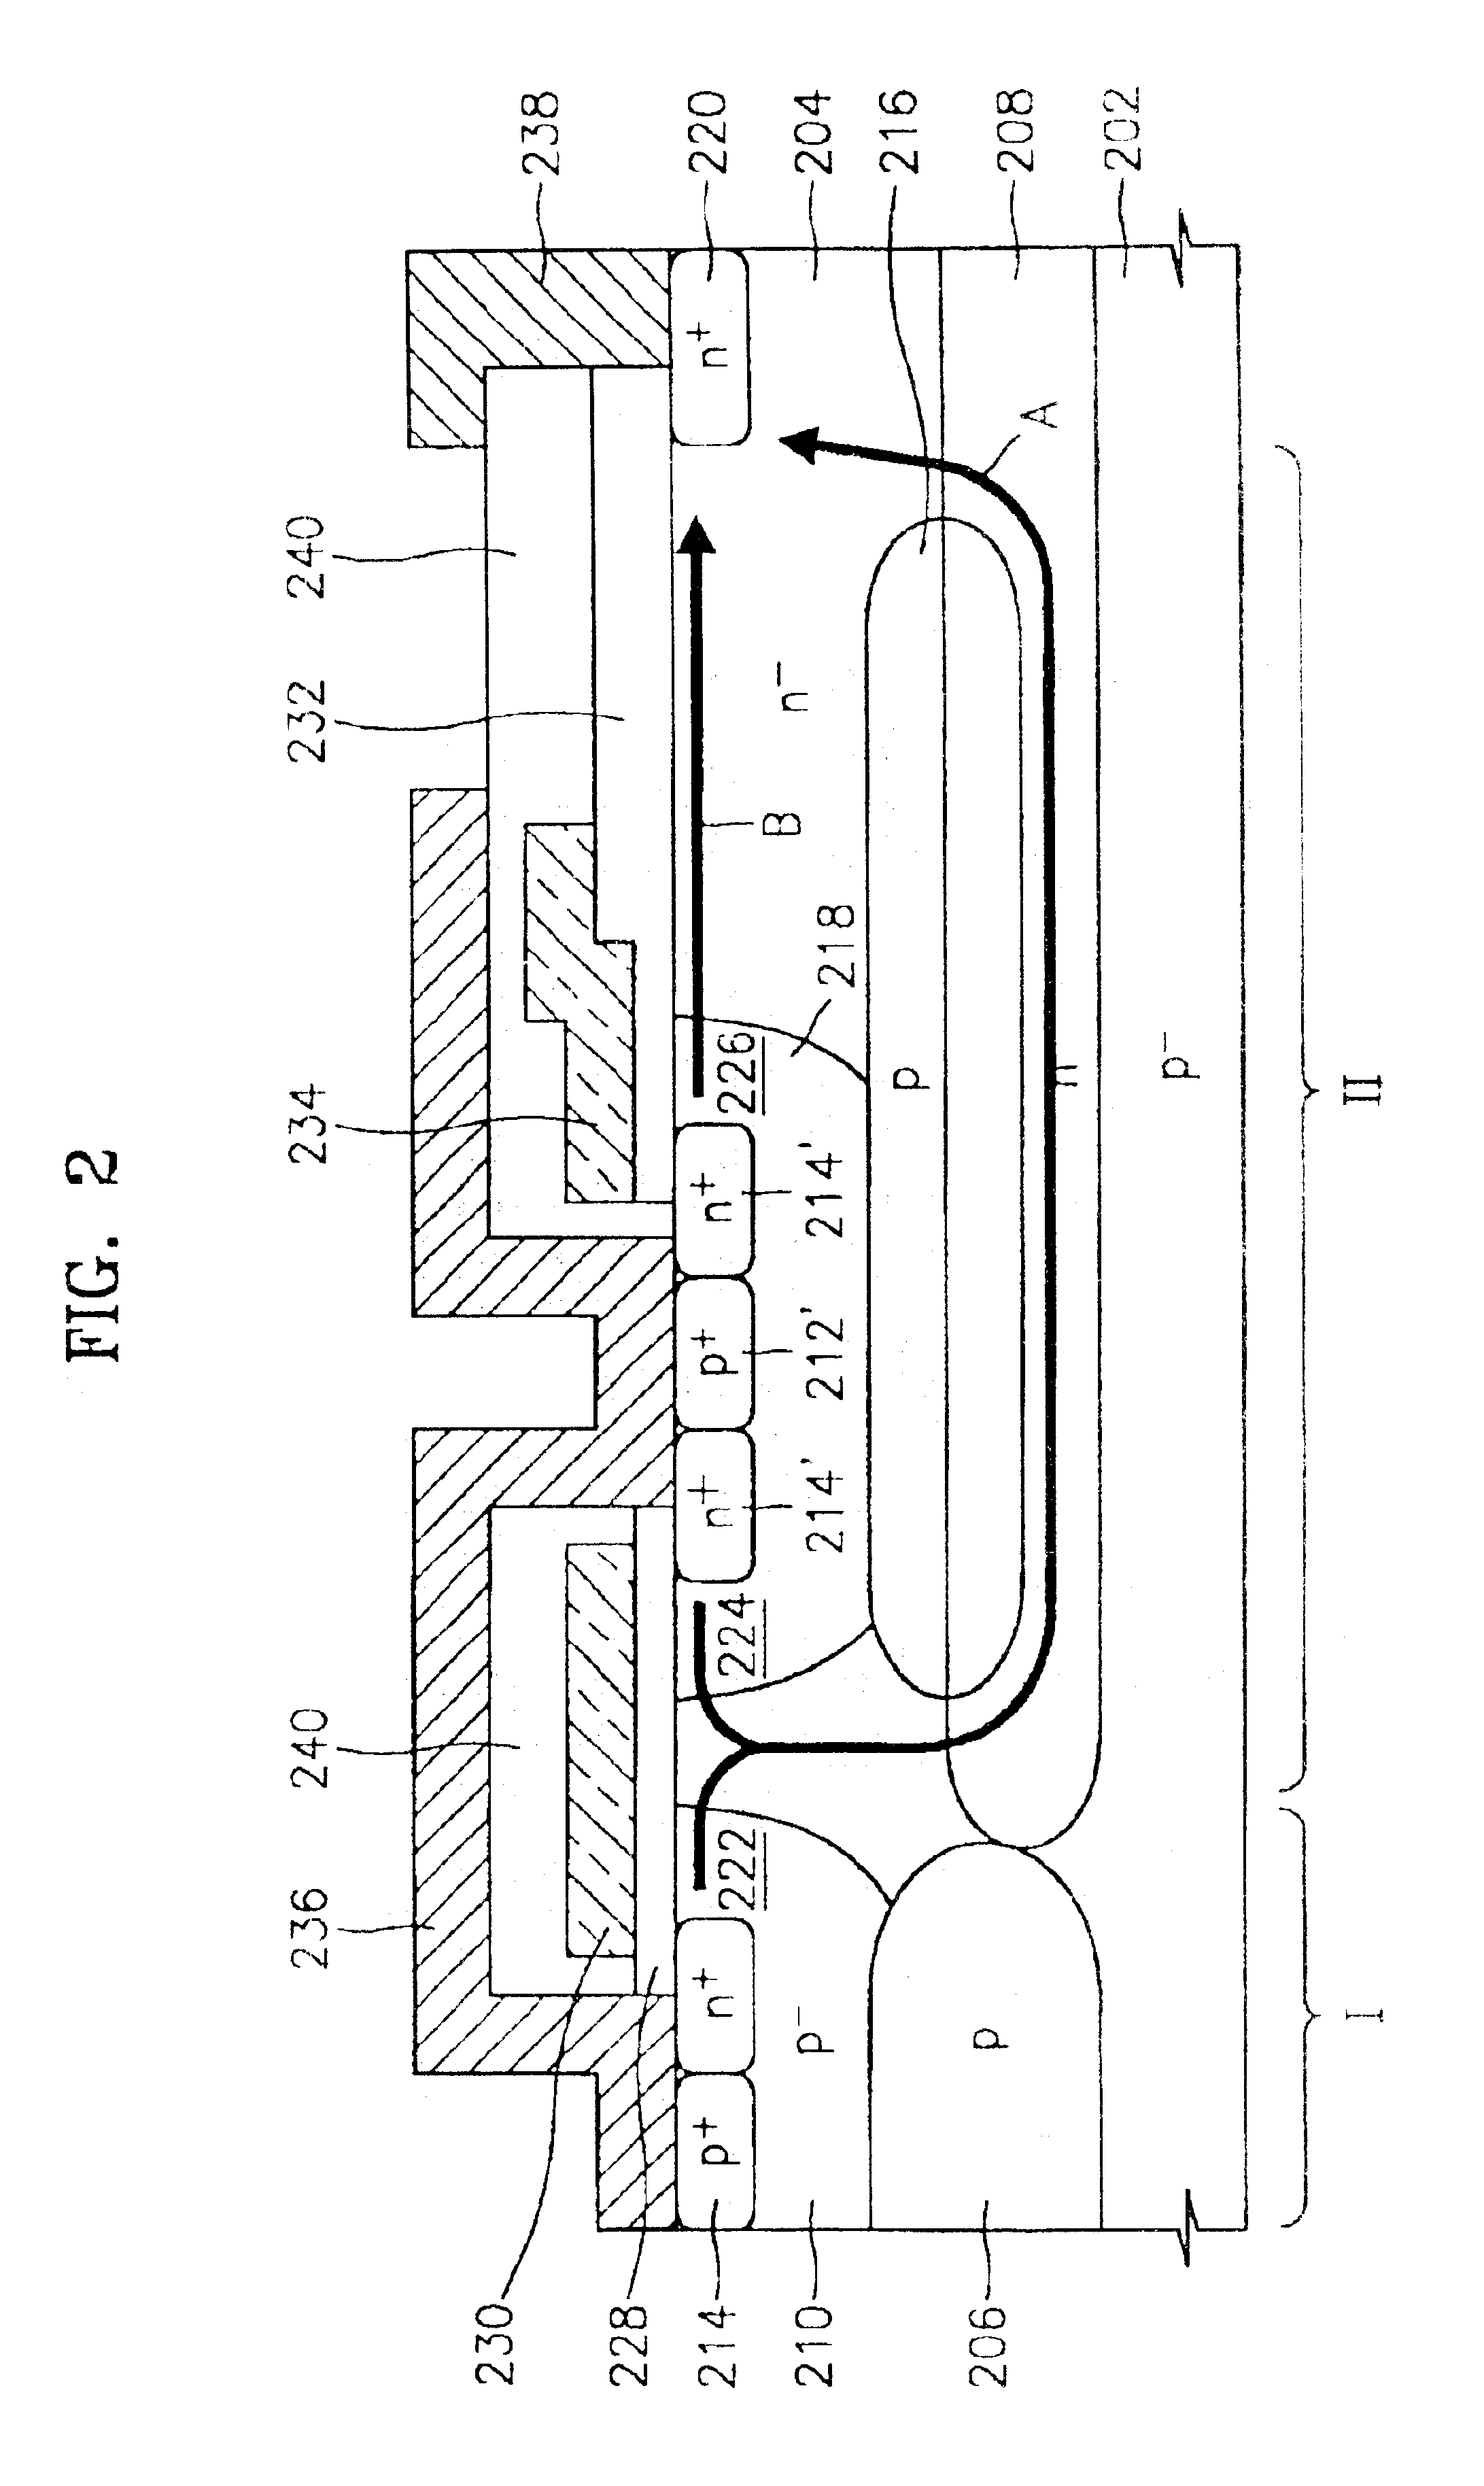 Lateral double-diffused MOS transistor having multiple current paths for high breakdown voltage and low on-resistance